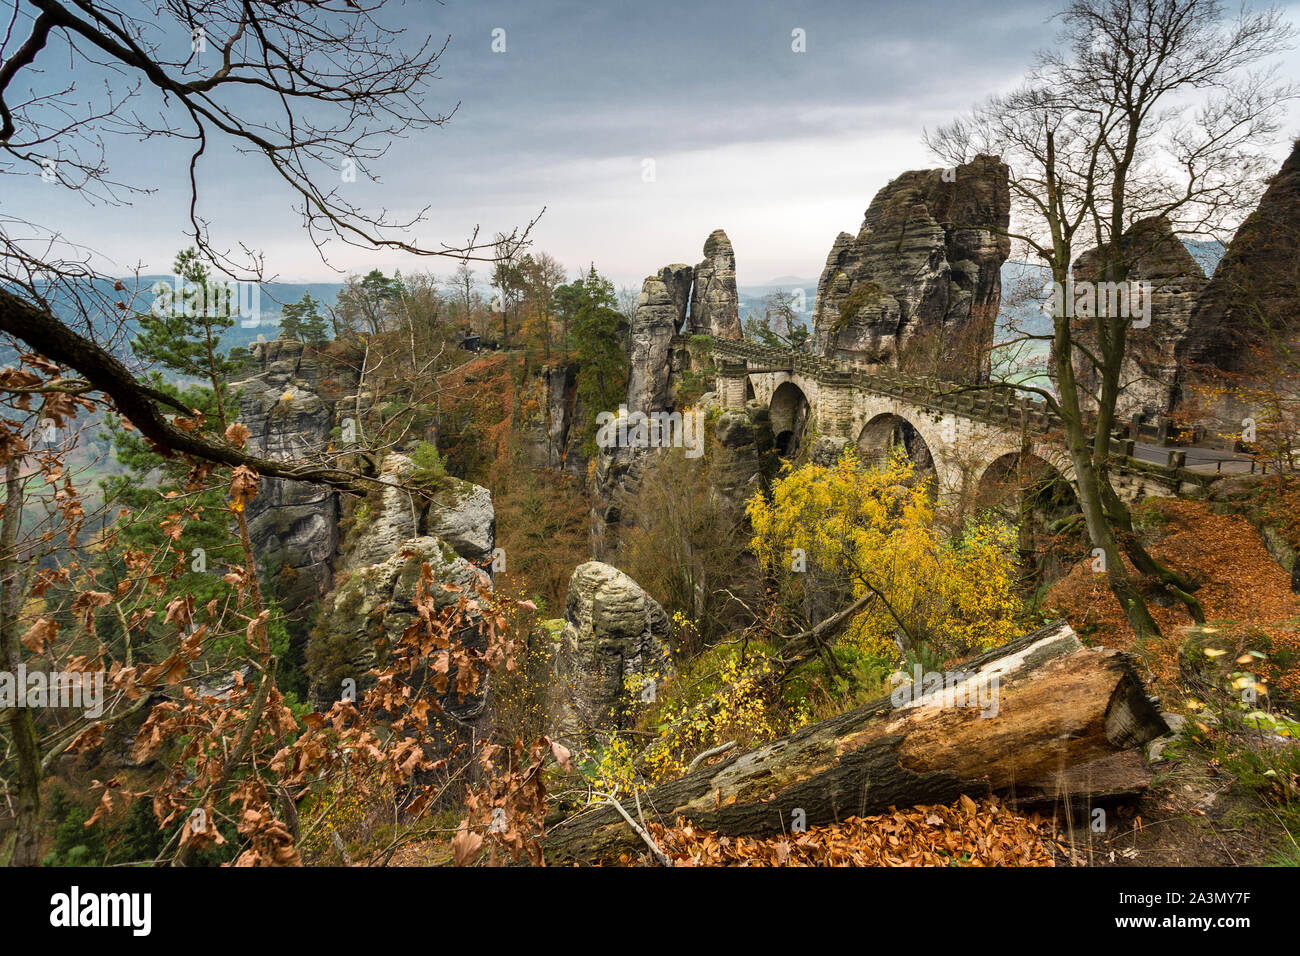 Bastei bridge Elbsandstein mountains, Autuum with coloured trees, Lilienstein Plateau in the Background, Germany Stock Photo